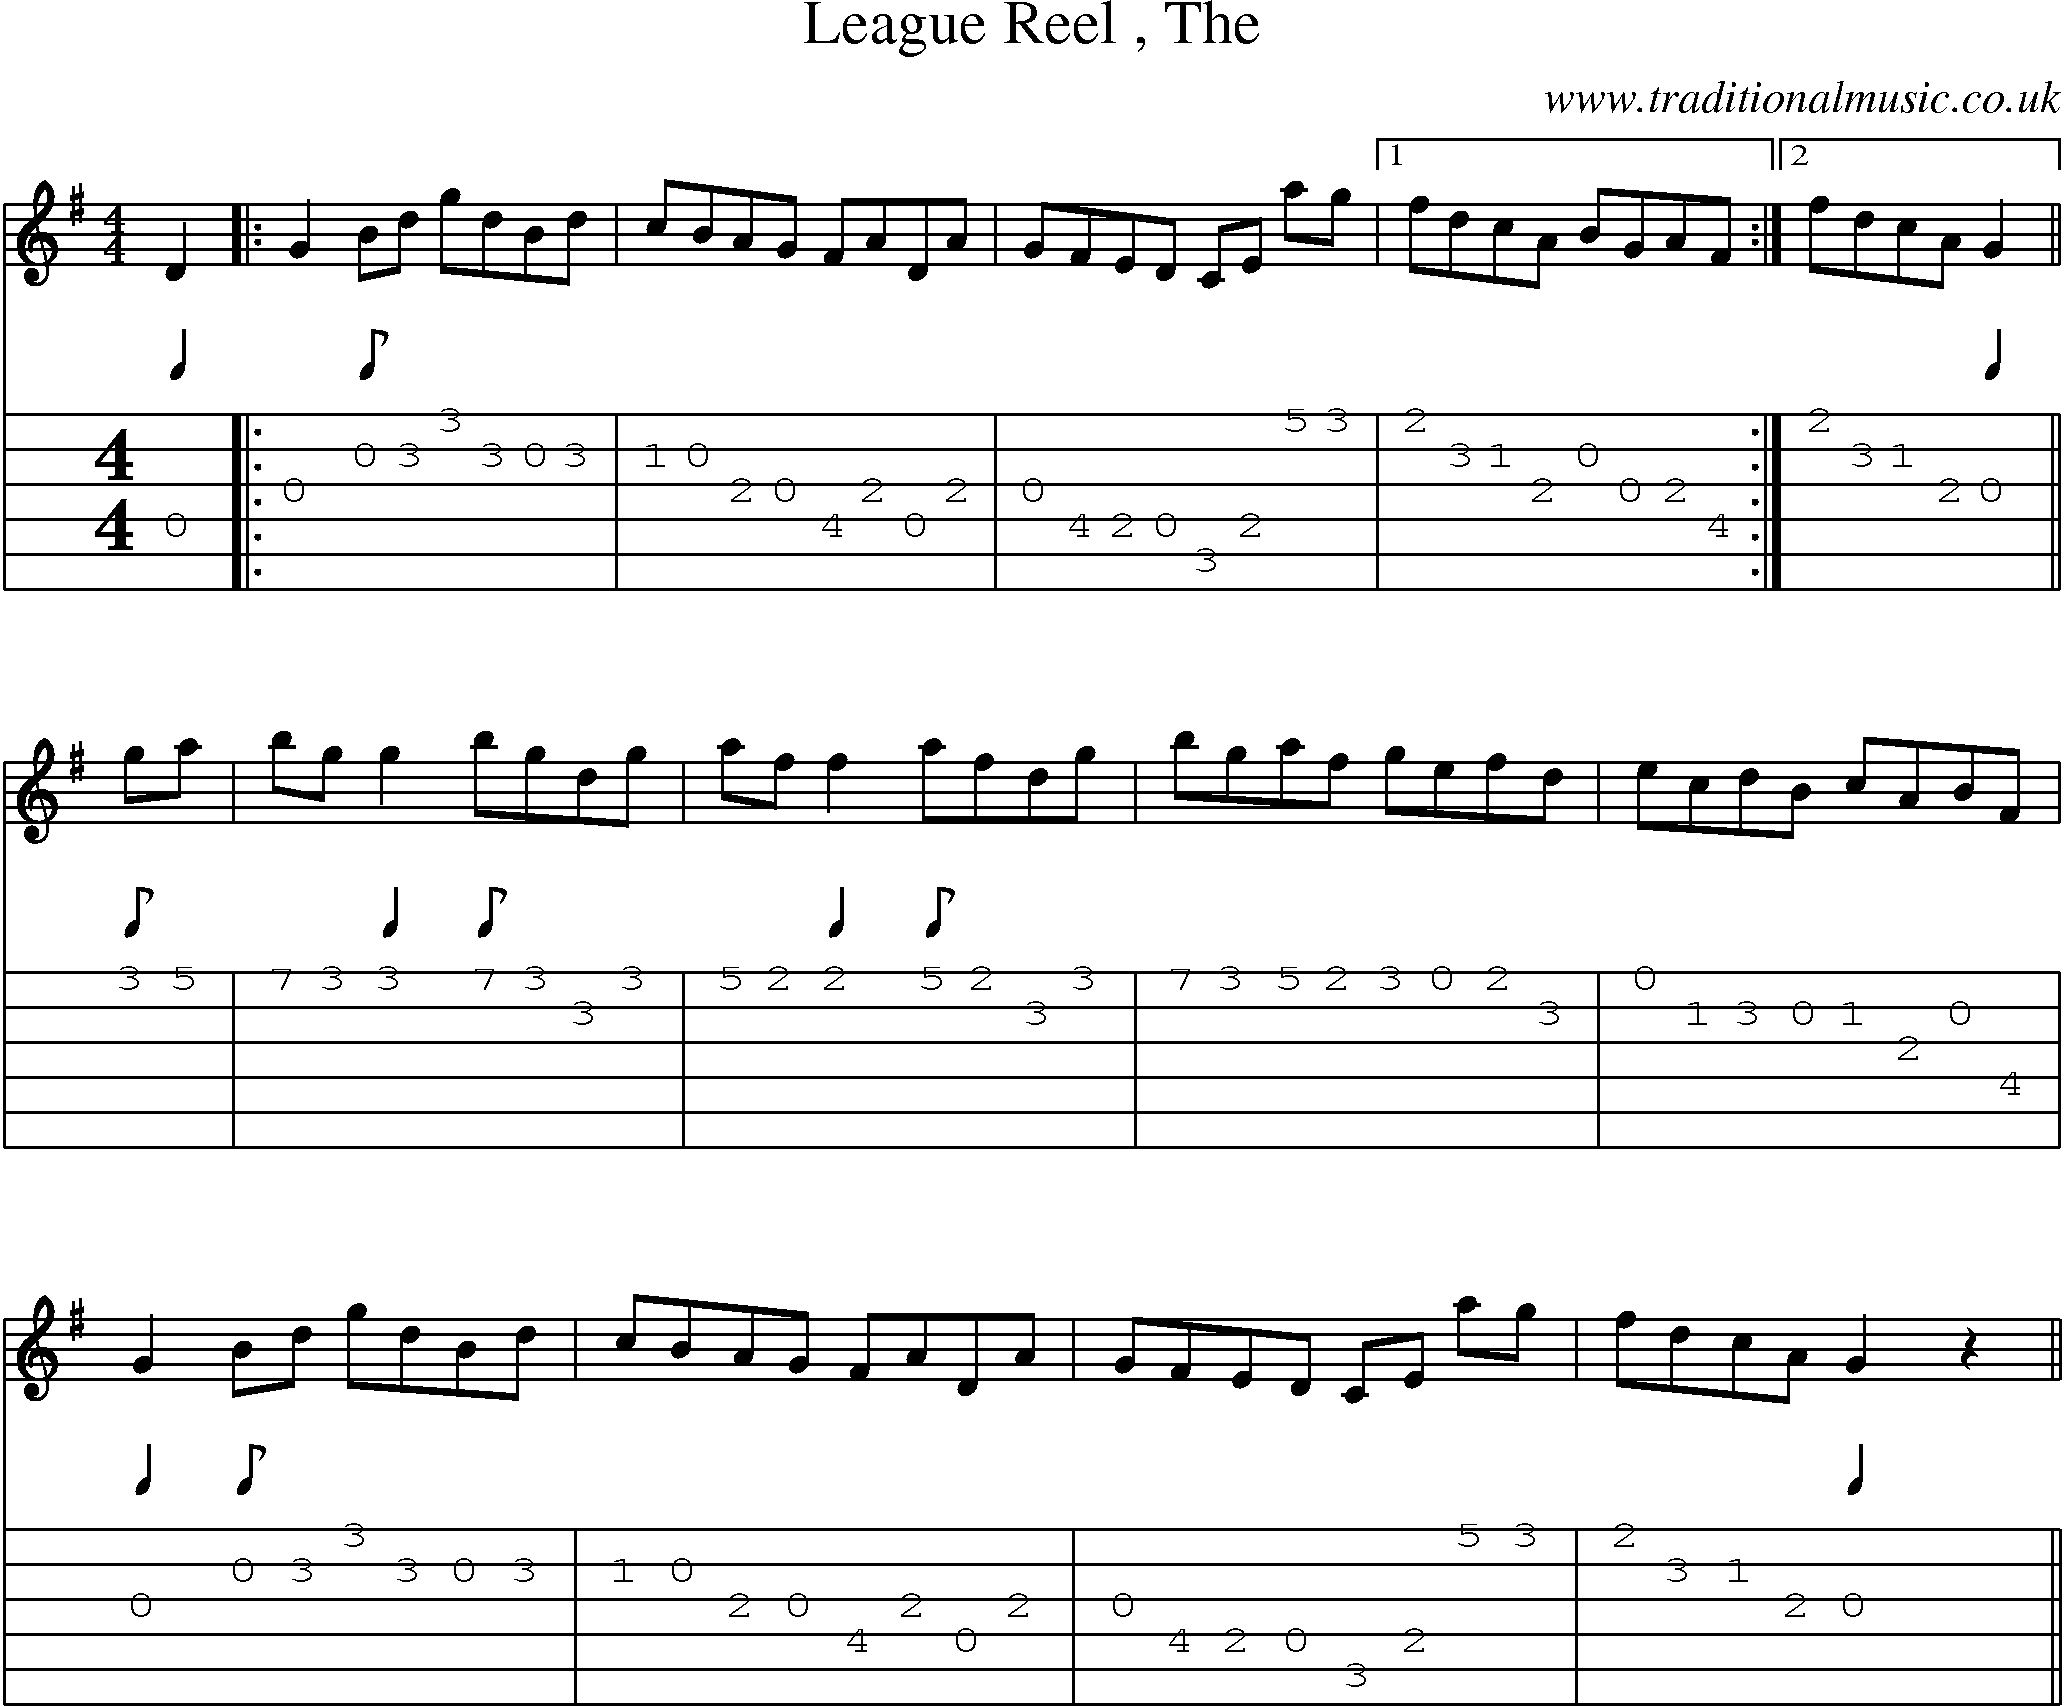 Music Score and Guitar Tabs for League Reel